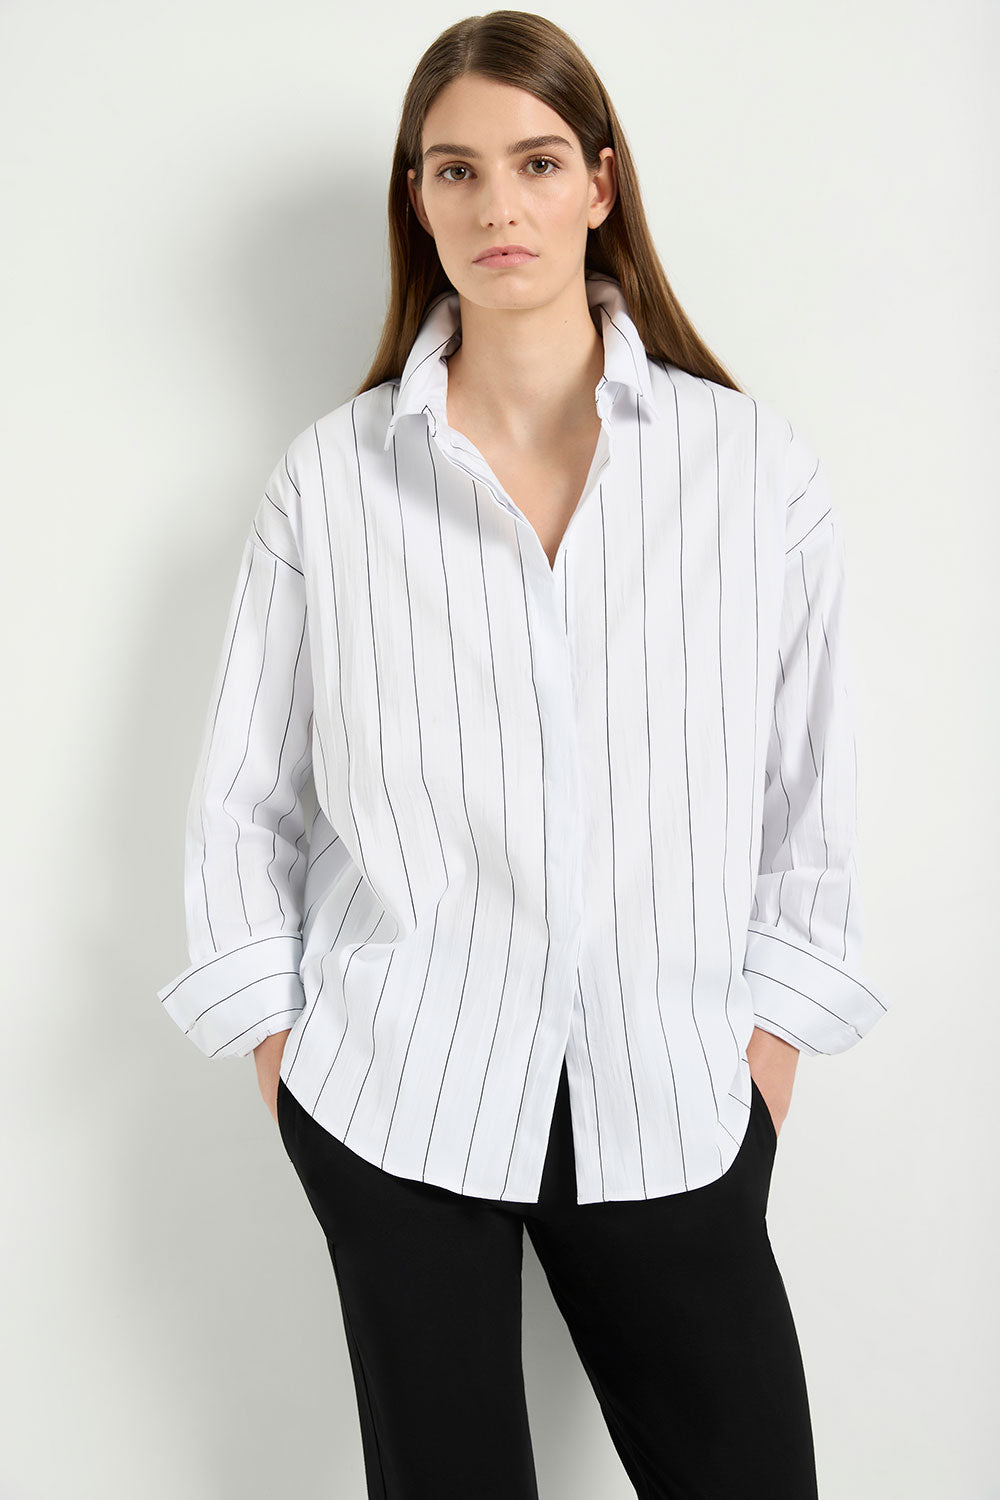 Mela Purdie Relaxed Mid Shirt in White/Black F727 8460